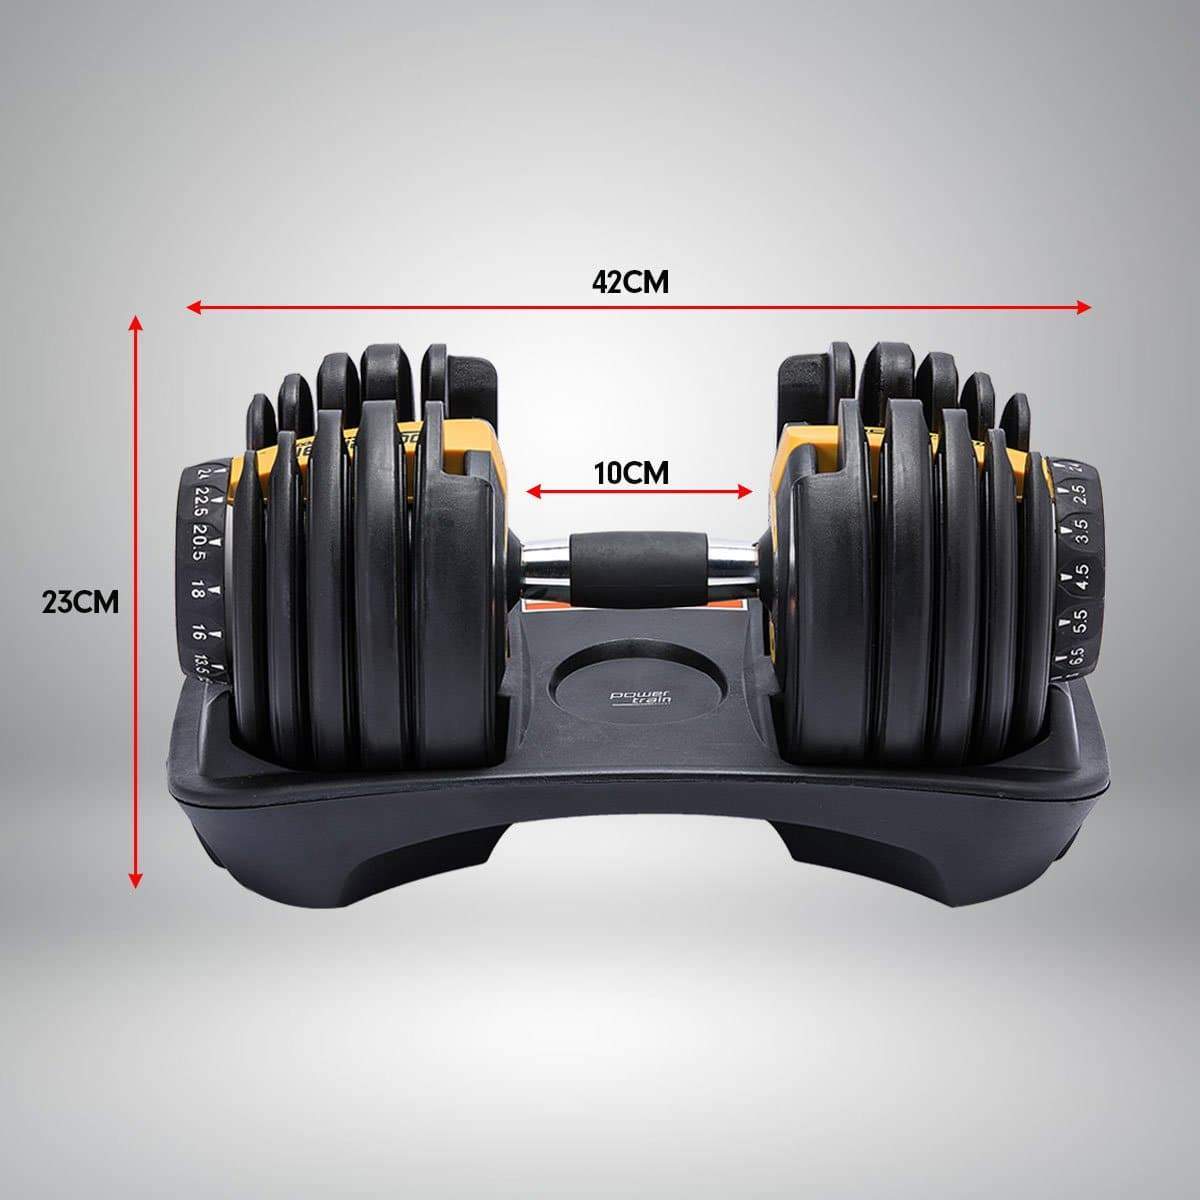 48KG Powertrain Adjustable Dumbbell Set With Stand - Gold